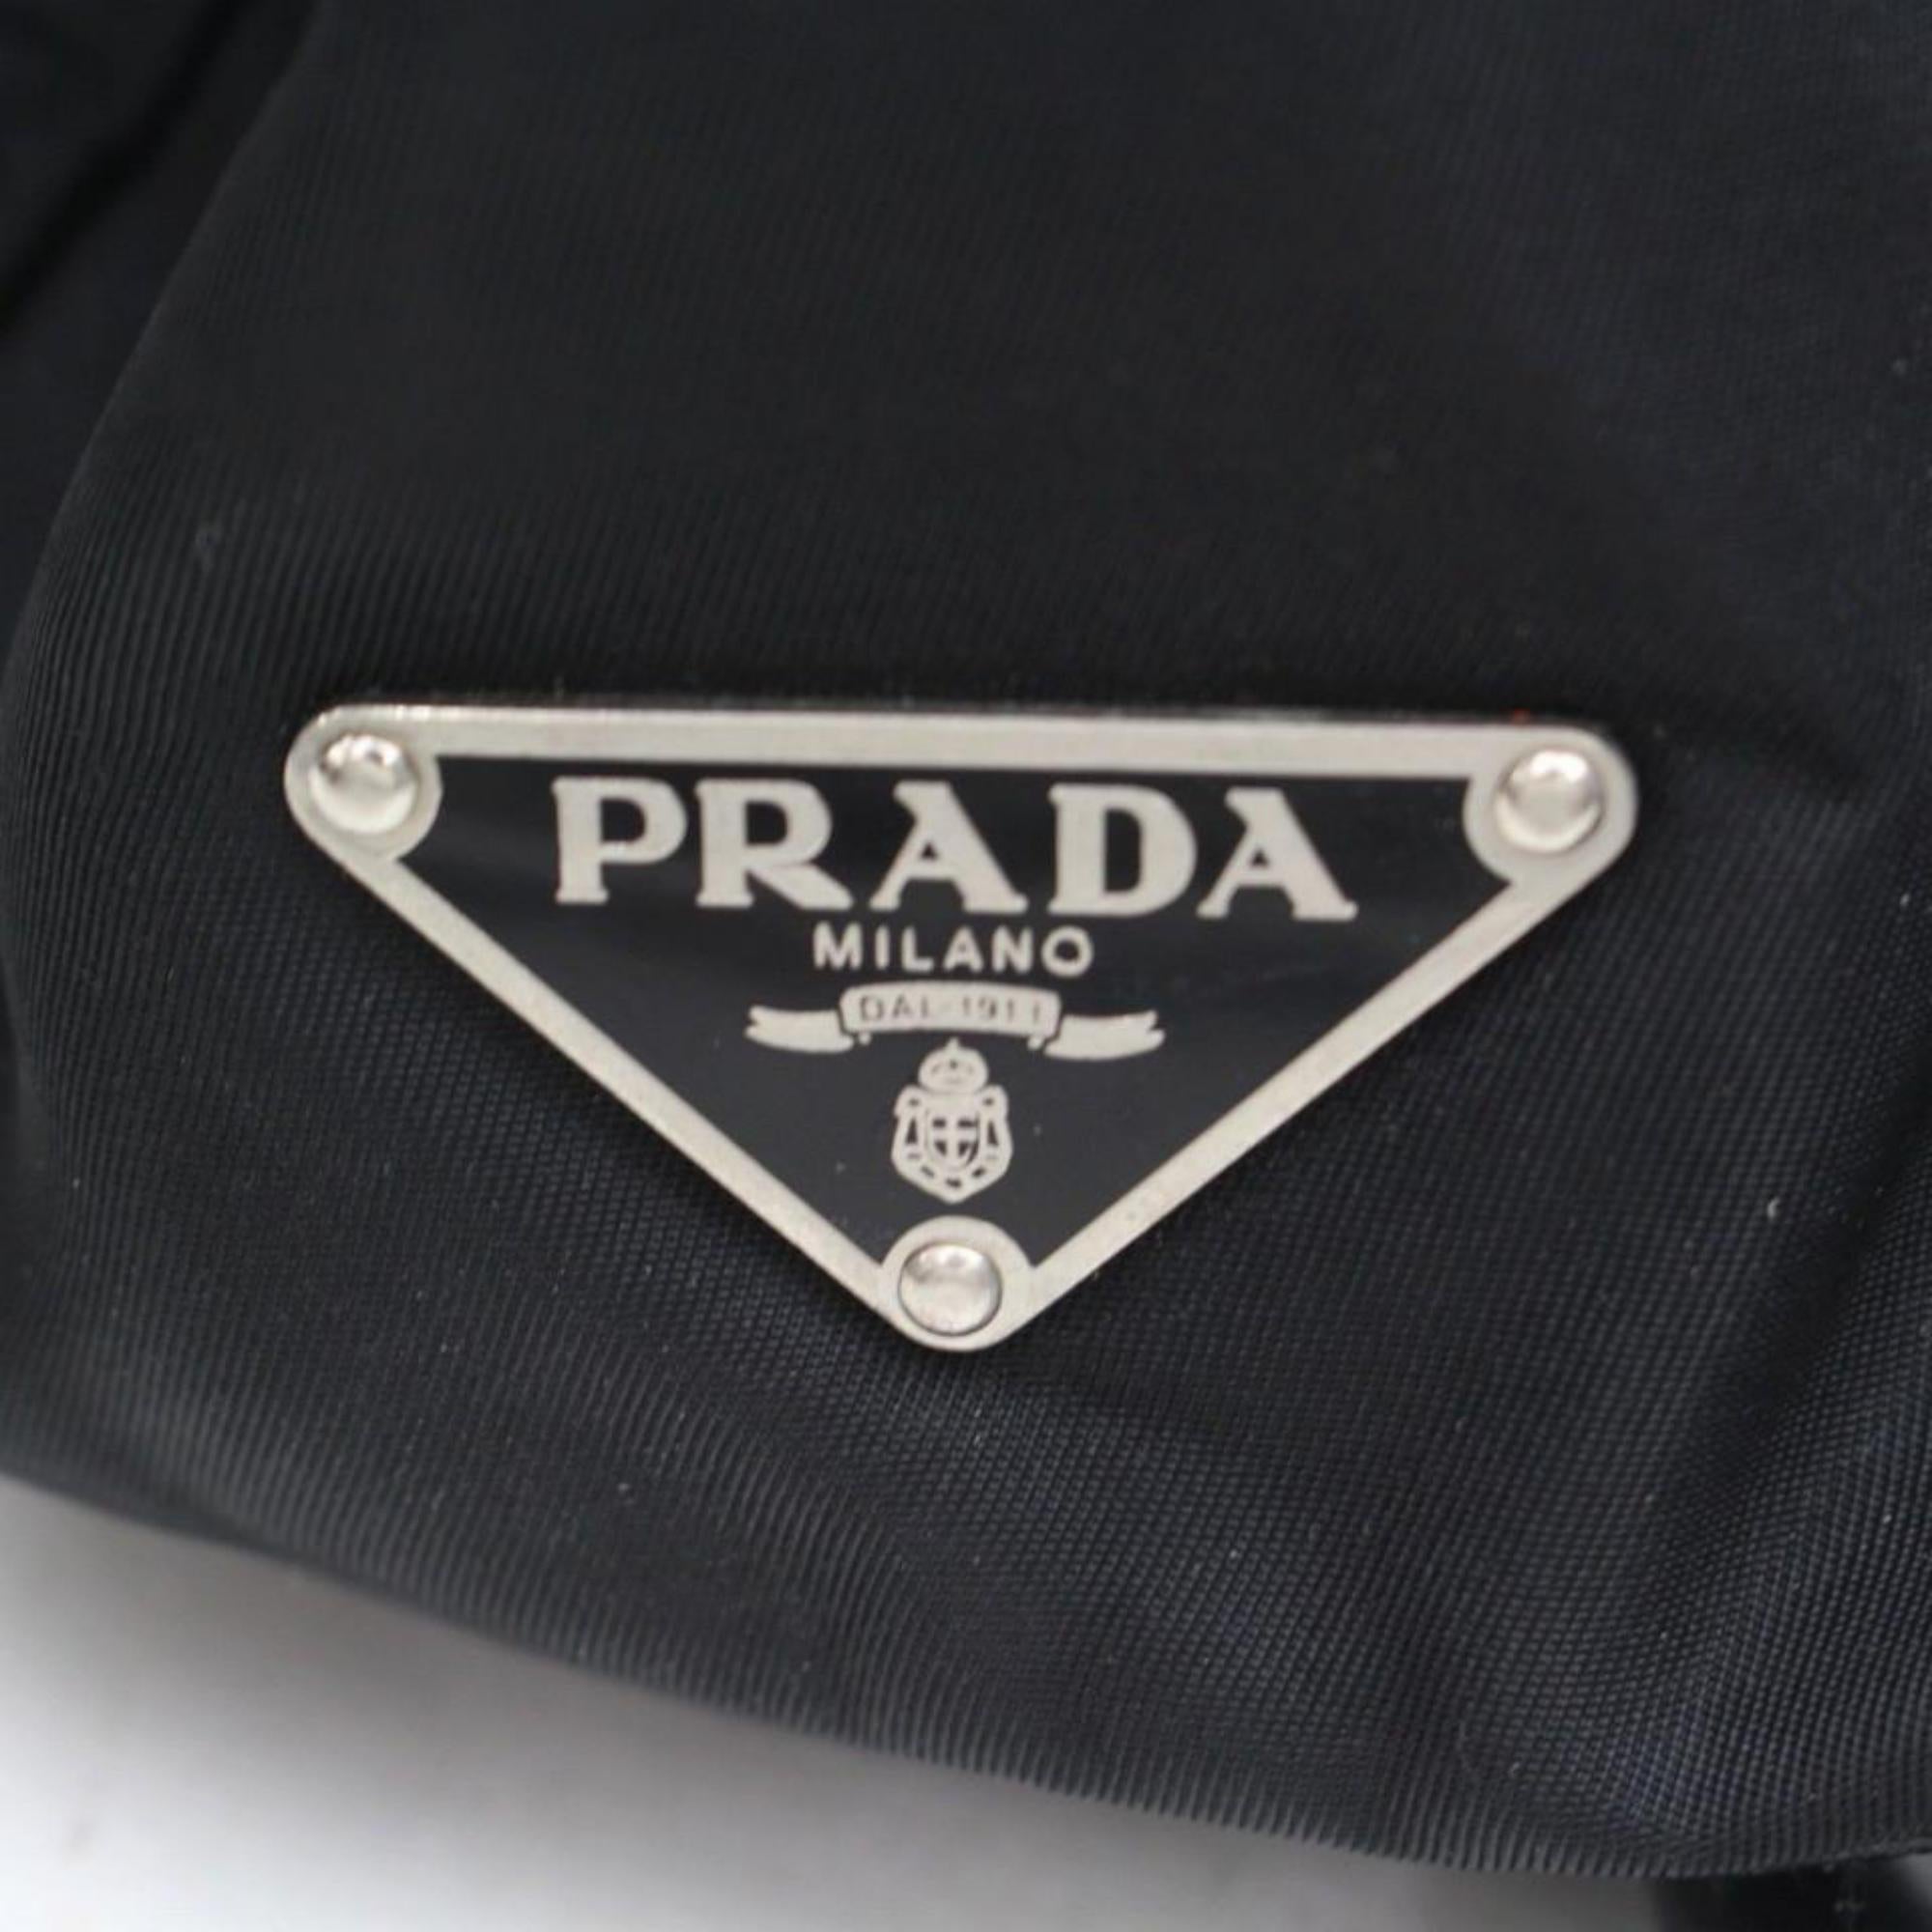 Prada Boston Shoulder 869473 Black Nylon Satchel In Excellent Condition For Sale In Forest Hills, NY